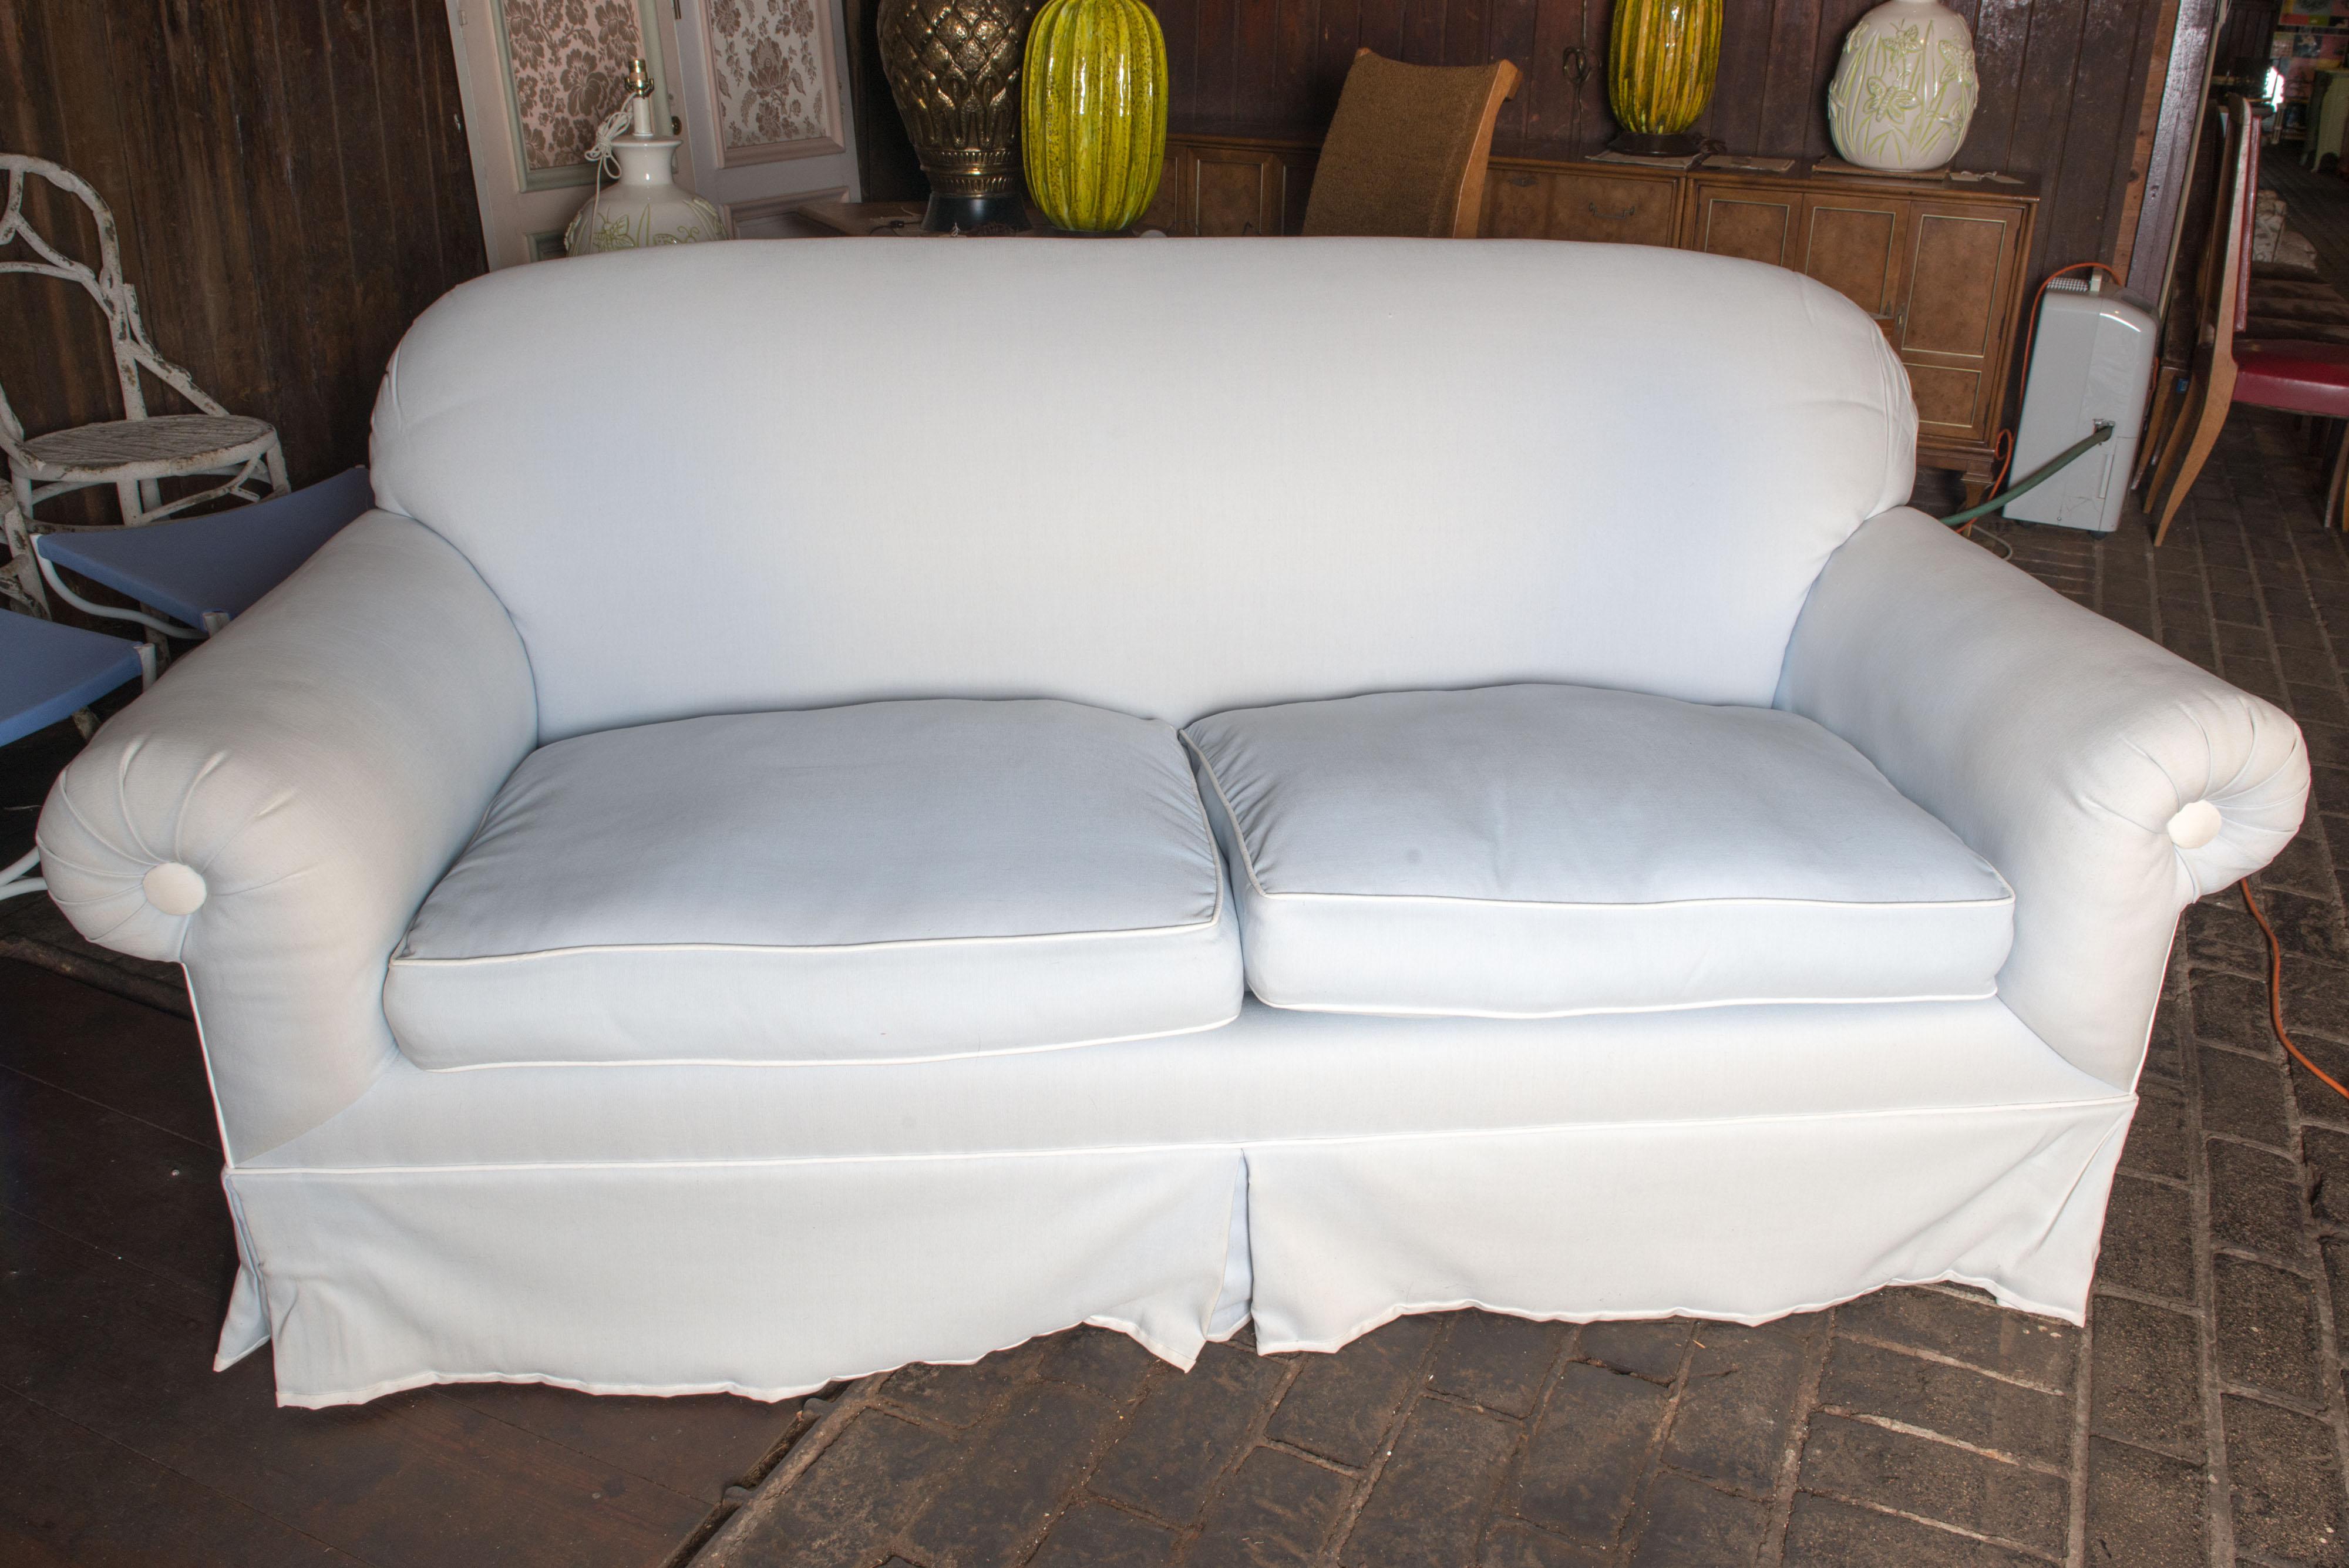 Sturdy, hardwood 1950s vintage sofa upholstered in Jim Thompson Phuket, Haze Blue and trimmed in Phuket, White cotton. Fabric is intact but faded. Arm height is 26